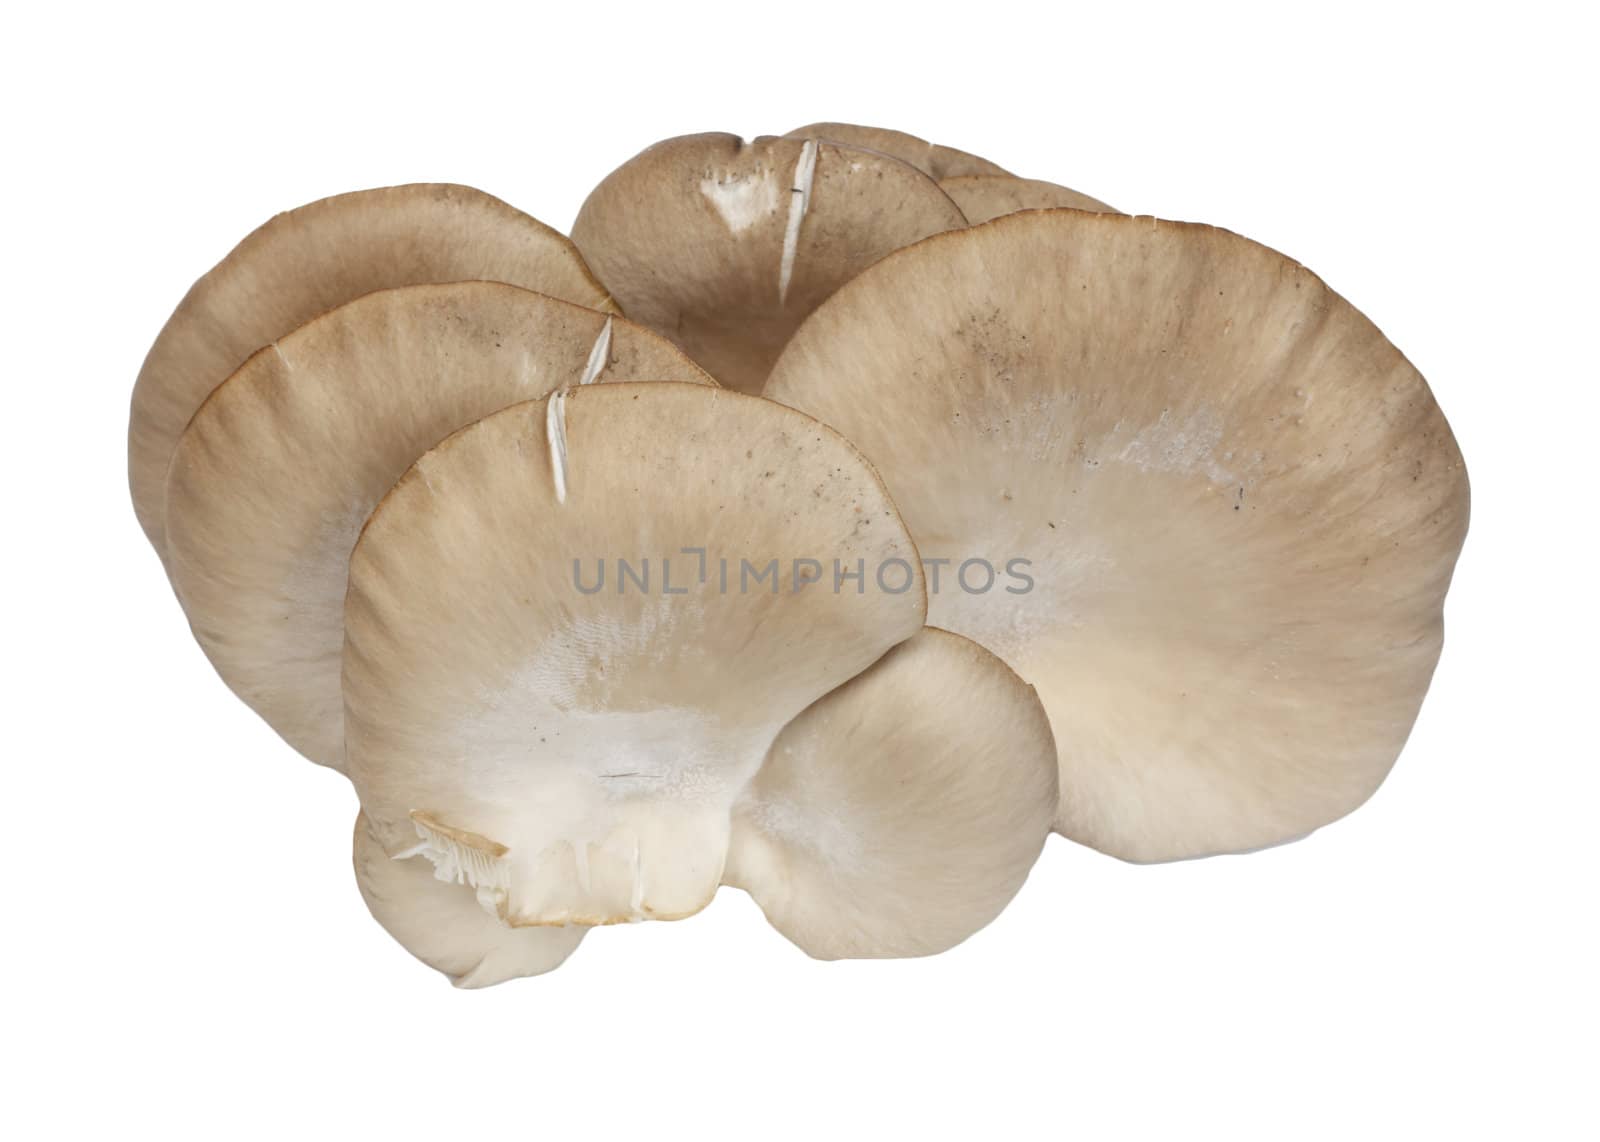 Oyster mushrooms on a white background 